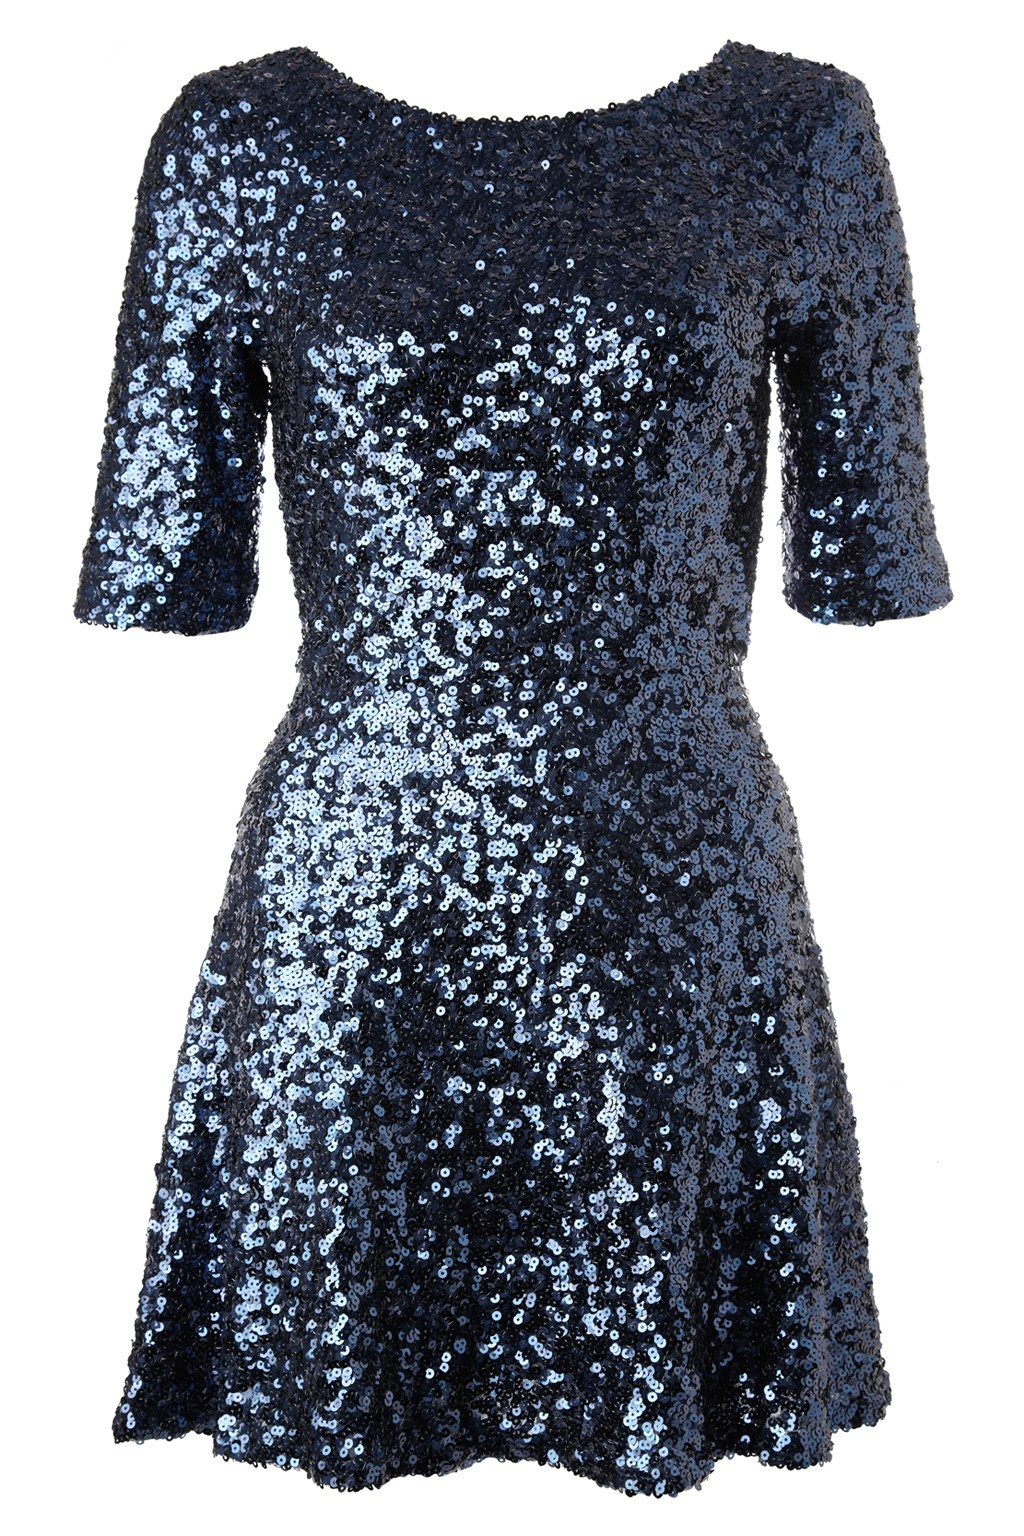 Lyst - French connection Ozlem Sequin Flared Dress in Blue